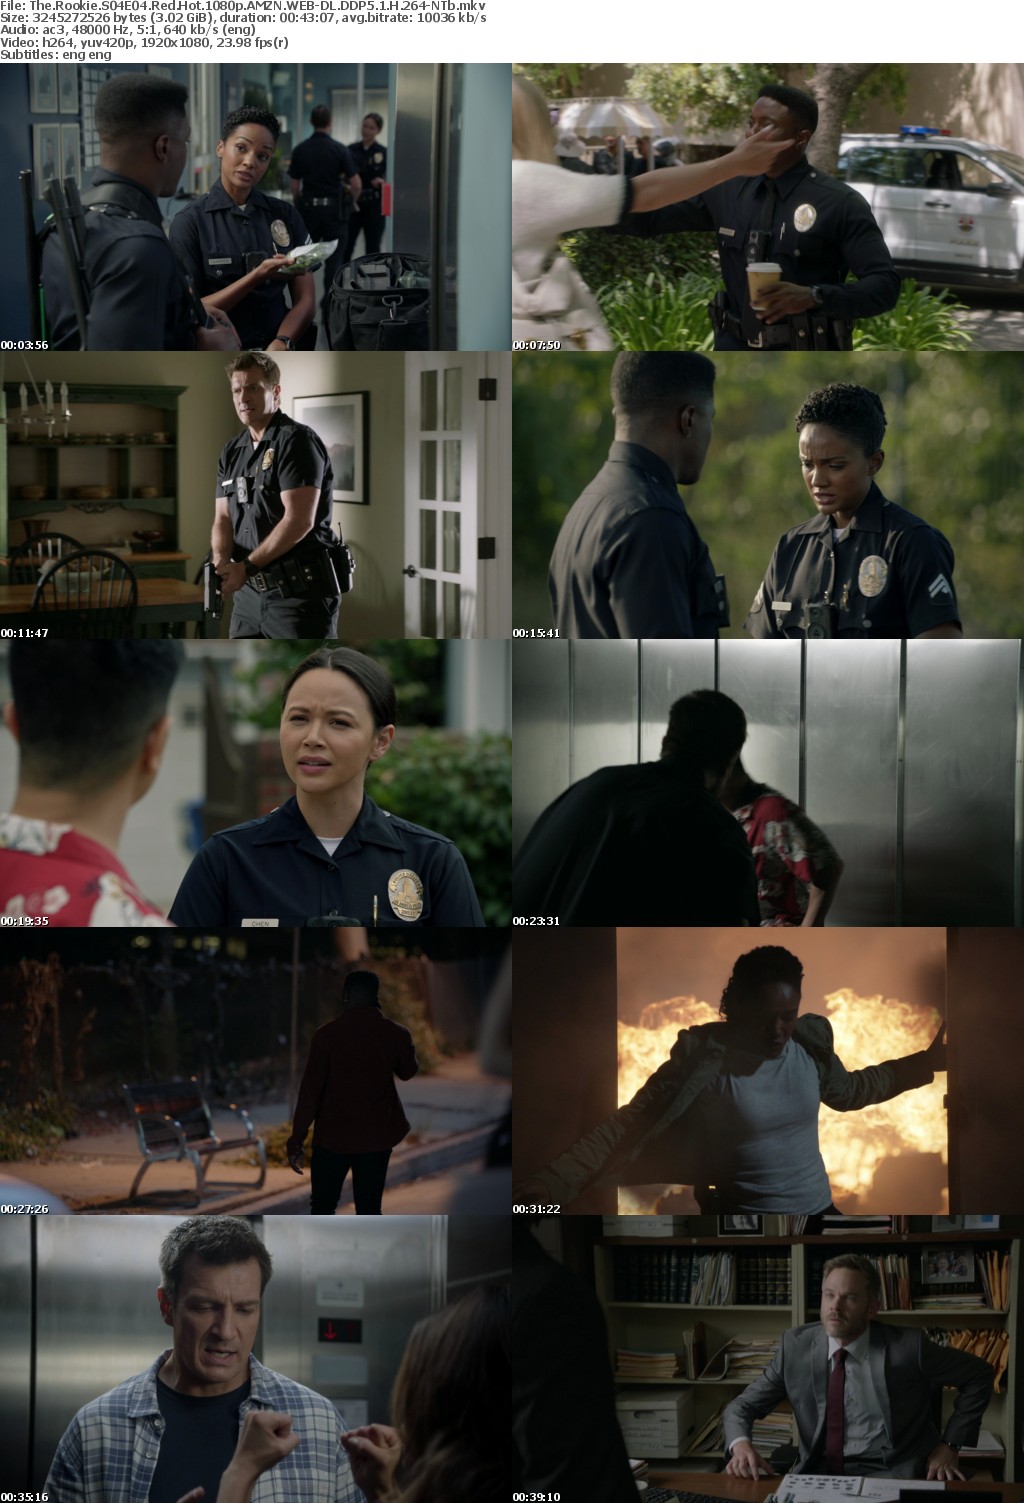 The Rookie S04E04 Red Hot 1080p AMZN WEBRip DDP5 1 x264-NTb